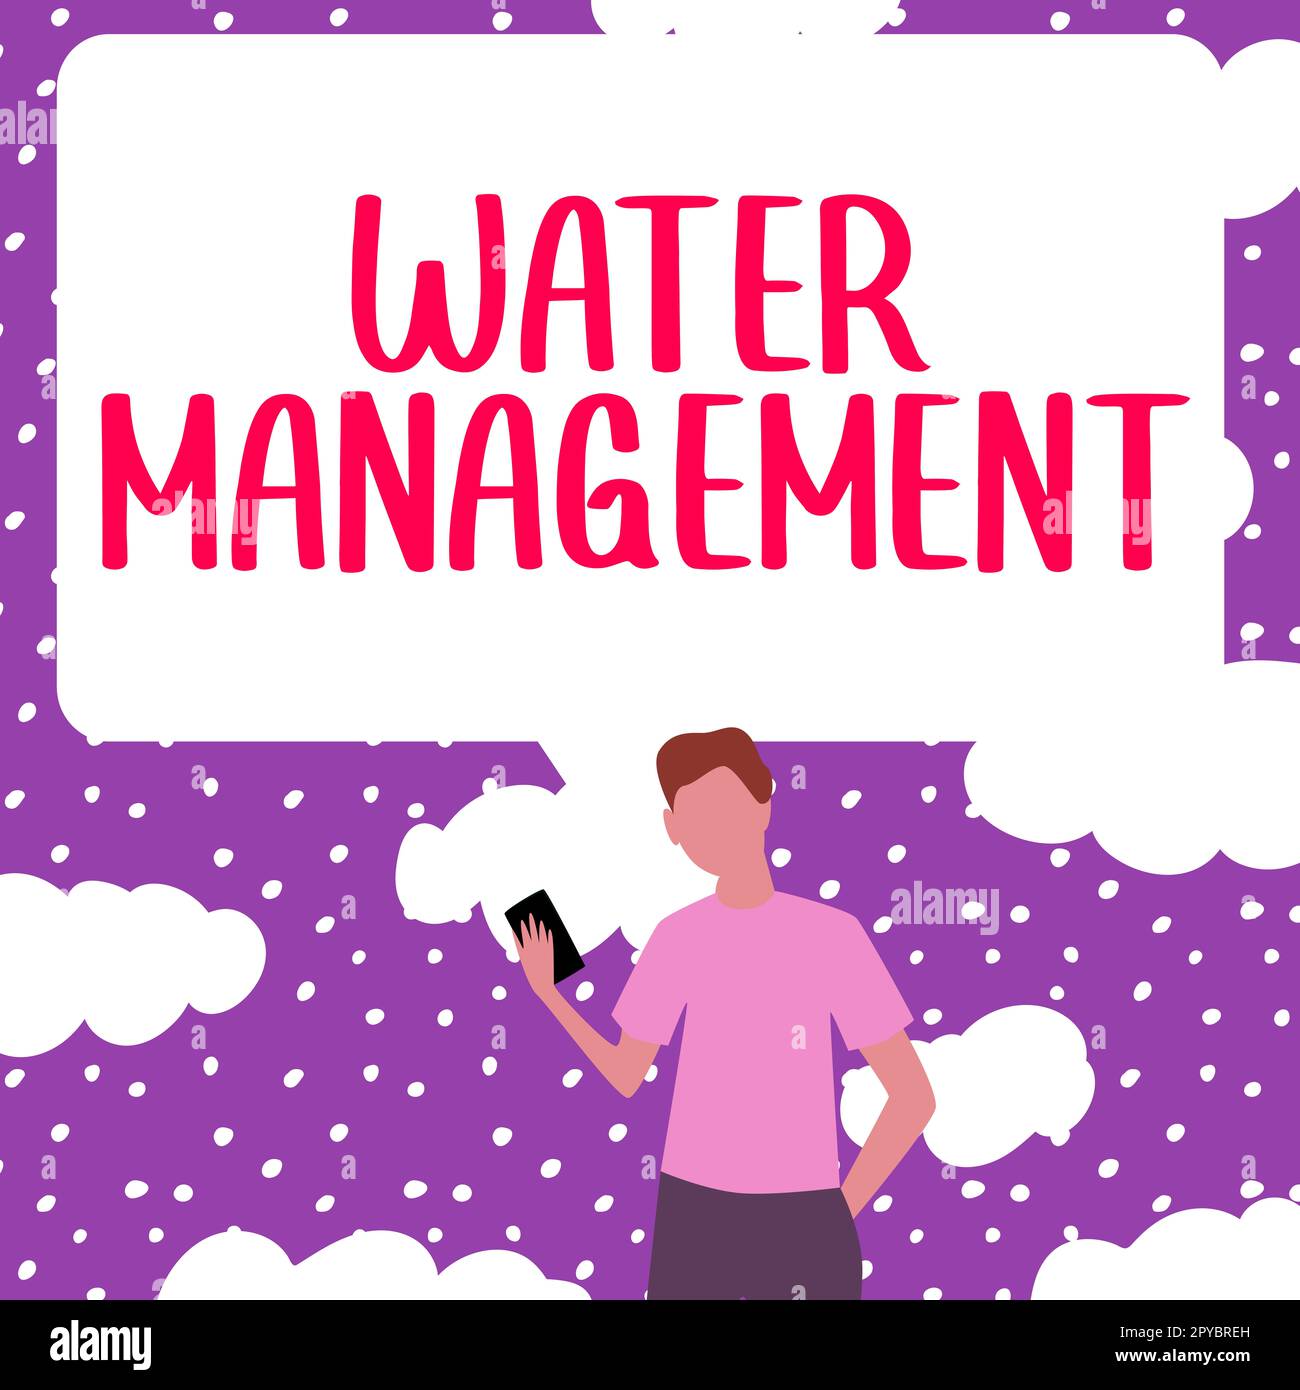 Sign displaying Water Management. Concept meaning optimum use of water resources under defined water polices Stock Photo